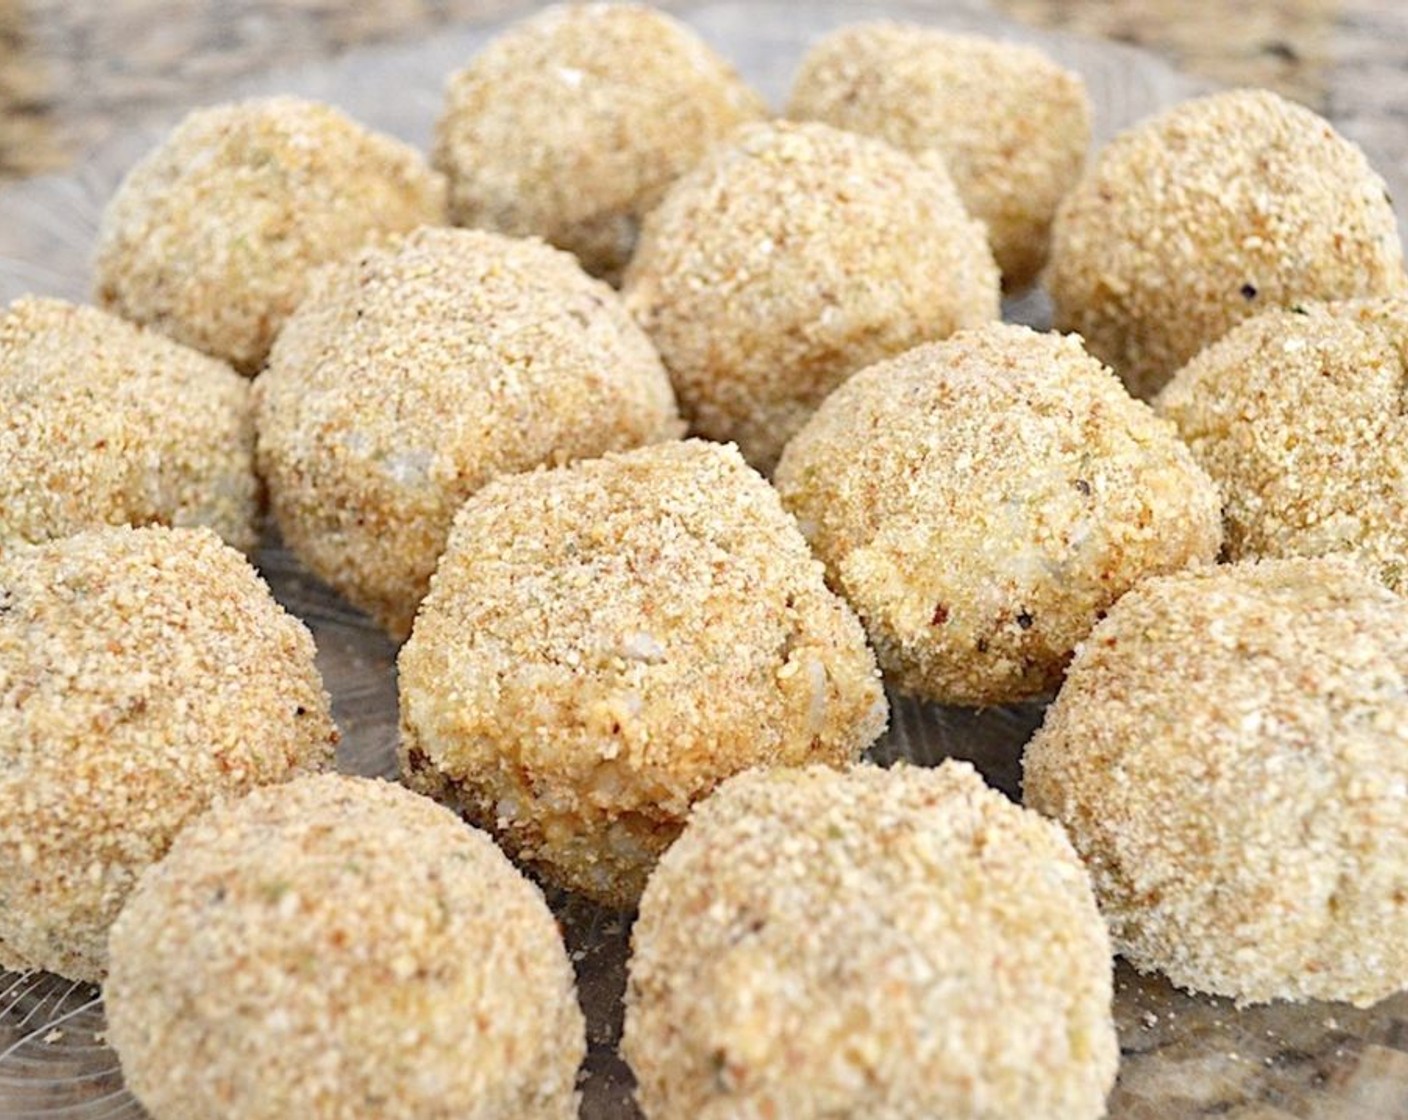 step 5 Make little balls of the rice mixture the size of your palm and put each one through the breading procedure with the flour first, then the eggs, then the breadcrumbs. When you've breaded all of your arancini, set the platter in the fridge for an hour to set.